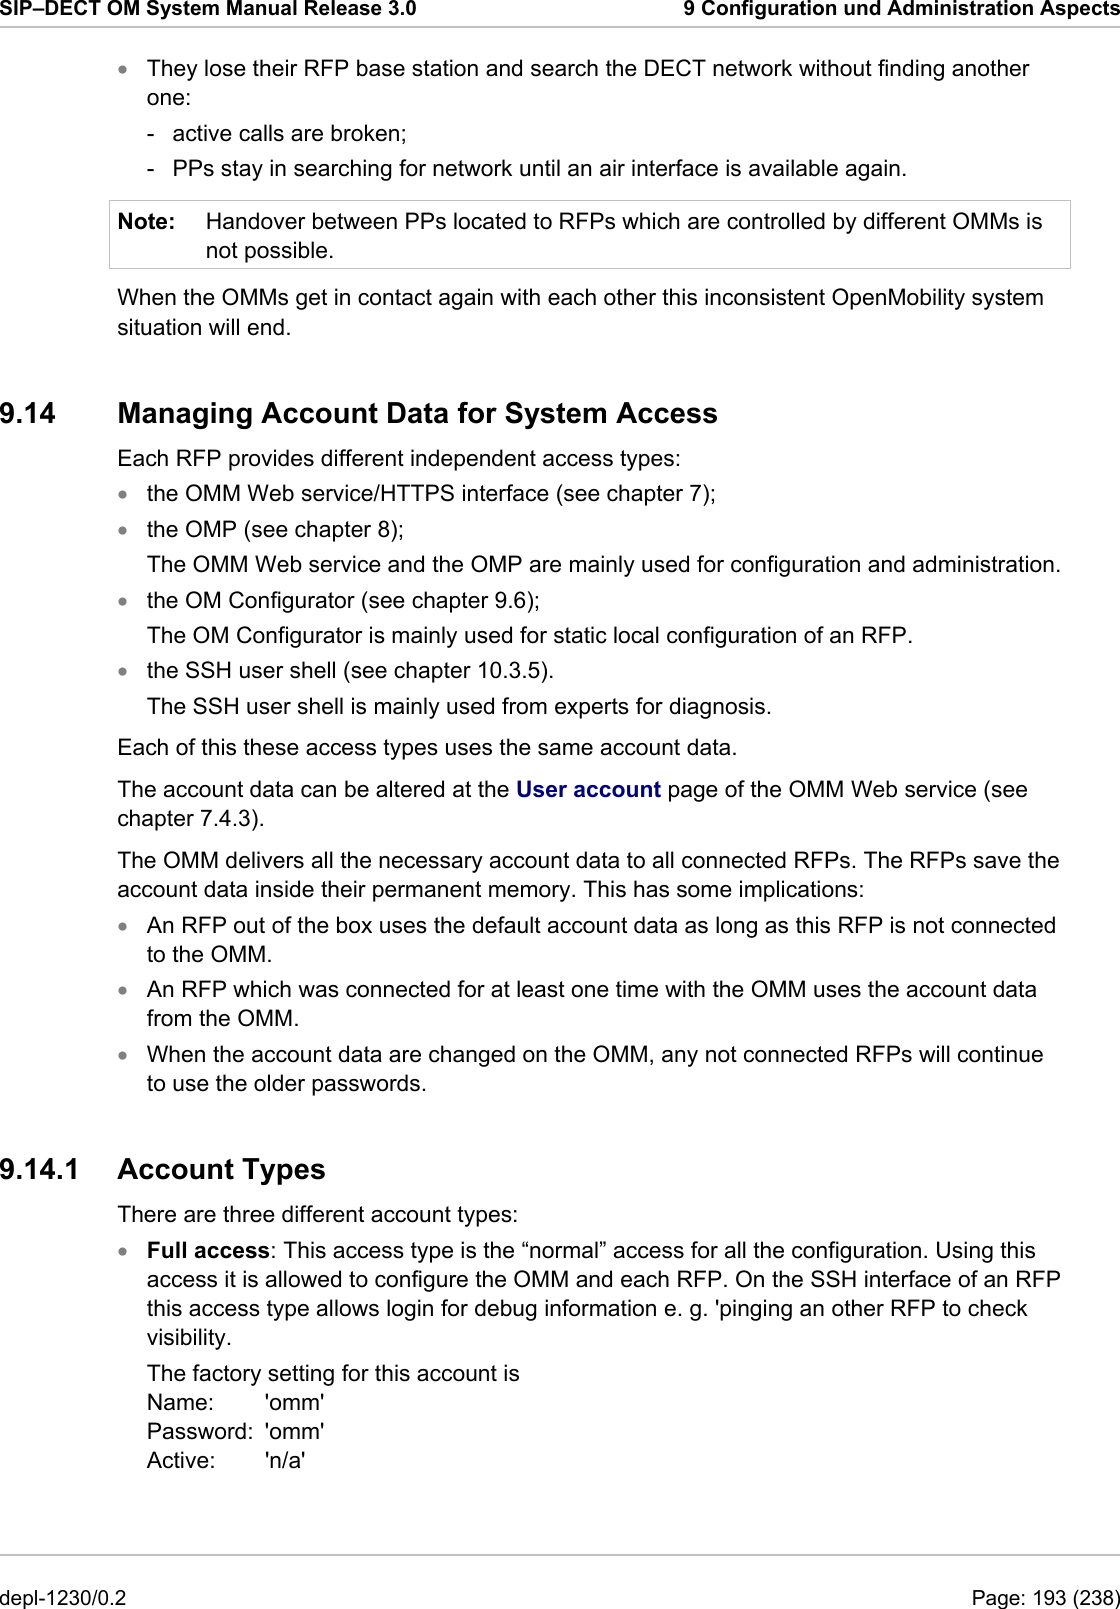 SIP–DECT OM System Manual Release 3.0  9 Configuration und Administration Aspects • Note: They lose their RFP base station and search the DECT network without finding another one: -  active calls are broken;  -  PPs stay in searching for network until an air interface is available again. Handover between PPs located to RFPs which are controlled by different OMMs is not possible. When the OMMs get in contact again with each other this inconsistent OpenMobility system situation will end. 9.14 Managing Account Data for System Access Each RFP provides different independent access types:  the OMM Web service/HTTPS interface (see chapter 7); • • • • • • • • the OMP (see chapter 8);  The OMM Web service and the OMP are mainly used for configuration and administration. the OM Configurator (see chapter 9.6);  The OM Configurator is mainly used for static local configuration of an RFP. the SSH user shell (see chapter 10.3.5). The SSH user shell is mainly used from experts for diagnosis. Each of this these access types uses the same account data.  The account data can be altered at the User account page of the OMM Web service (see chapter 7.4.3).  The OMM delivers all the necessary account data to all connected RFPs. The RFPs save the account data inside their permanent memory. This has some implications: An RFP out of the box uses the default account data as long as this RFP is not connected to the OMM. An RFP which was connected for at least one time with the OMM uses the account data from the OMM. When the account data are changed on the OMM, any not connected RFPs will continue to use the older passwords. 9.14.1  Account Types  There are three different account types: Full access: This access type is the “normal” access for all the configuration. Using this access it is allowed to configure the OMM and each RFP. On the SSH interface of an RFP this access type allows login for debug information e. g. &apos;pinging an other RFP to check visibility. The factory setting for this account is Name:   &apos;omm&apos; Password:  &apos;omm&apos; Active: &apos;n/a&apos; depl-1230/0.2  Page: 193 (238) 